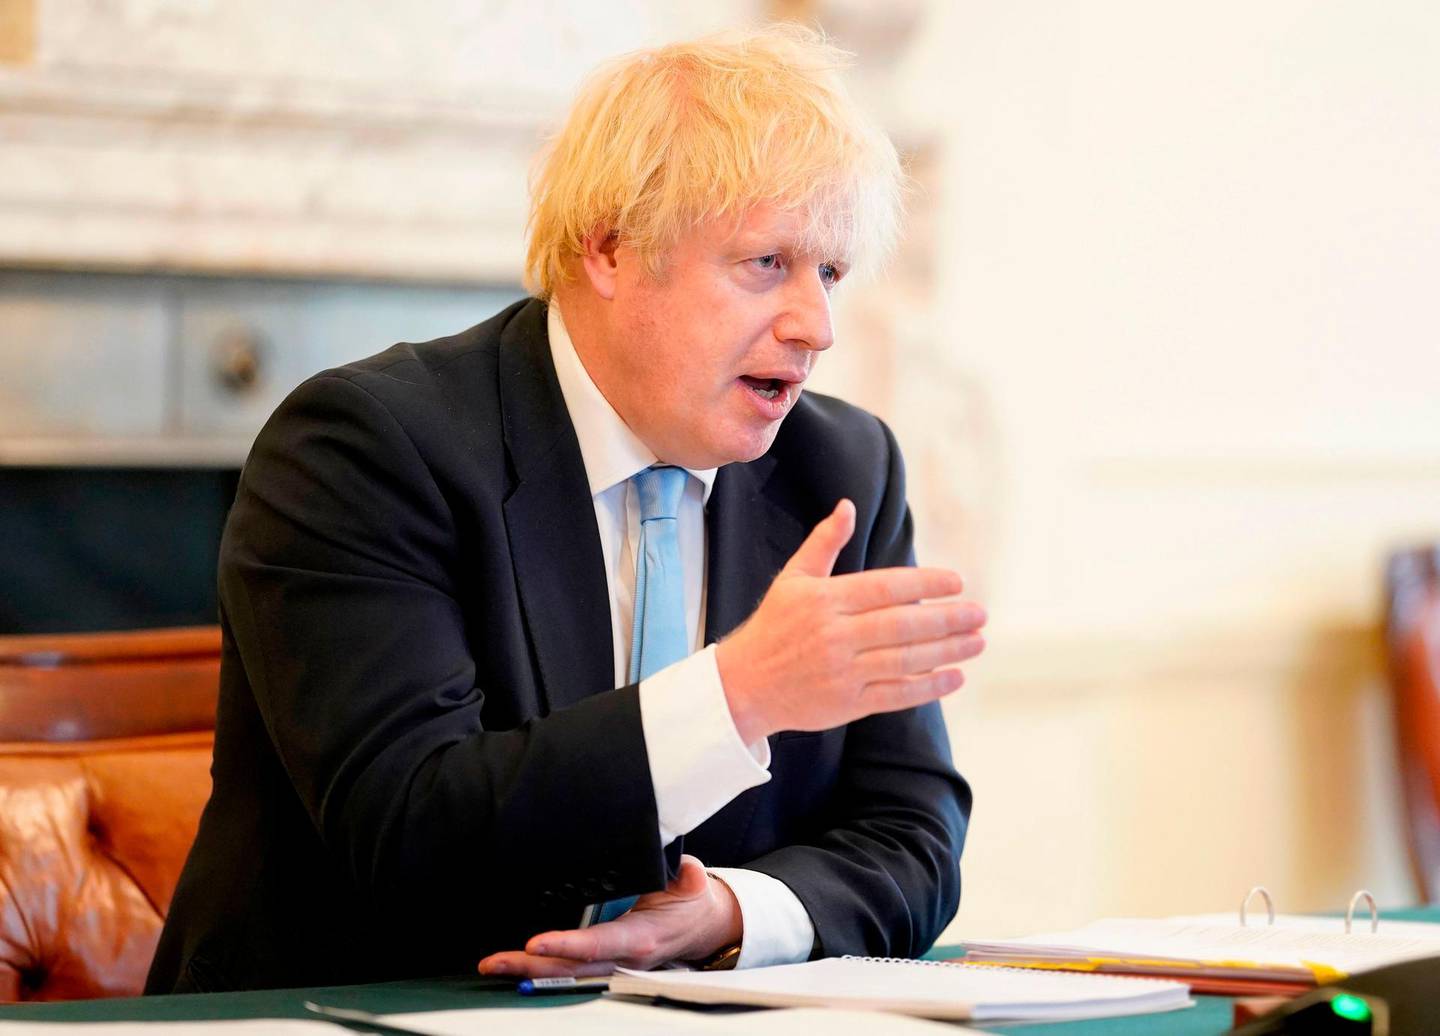 A handout image released by 10 Downing Street, shows Britain's Prime Minister Boris Johnson answering questions from a Parliamentary Liaison Committee on the government's handling of the global Covid-19 pandemic in London on May 27, 2020.  British Prime Minister Boris Johnson saw his public support suffer the sharpest fall for a Conservative leader in a decade Wednesday as he prepared to be grilled by lawmakers over his handling of the Dominic Cummings scandal. Johnson has stuck by Cummings despite a public and political backlash over his top aide's travels to visit family despite the government's strict rules to curb the coronavirus pandemic. - RESTRICTED TO EDITORIAL USE - MANDATORY CREDIT "AFP PHOTO / 10 DOWNING STREET / ANDREW PARSONS " - NO MARKETING - NO ADVERTISING CAMPAIGNS - DISTRIBUTED AS A SERVICE TO CLIENTS
 / AFP / 10 Downing Street / Andrew PARSONS / RESTRICTED TO EDITORIAL USE - MANDATORY CREDIT "AFP PHOTO / 10 DOWNING STREET / ANDREW PARSONS " - NO MARKETING - NO ADVERTISING CAMPAIGNS - DISTRIBUTED AS A SERVICE TO CLIENTS
